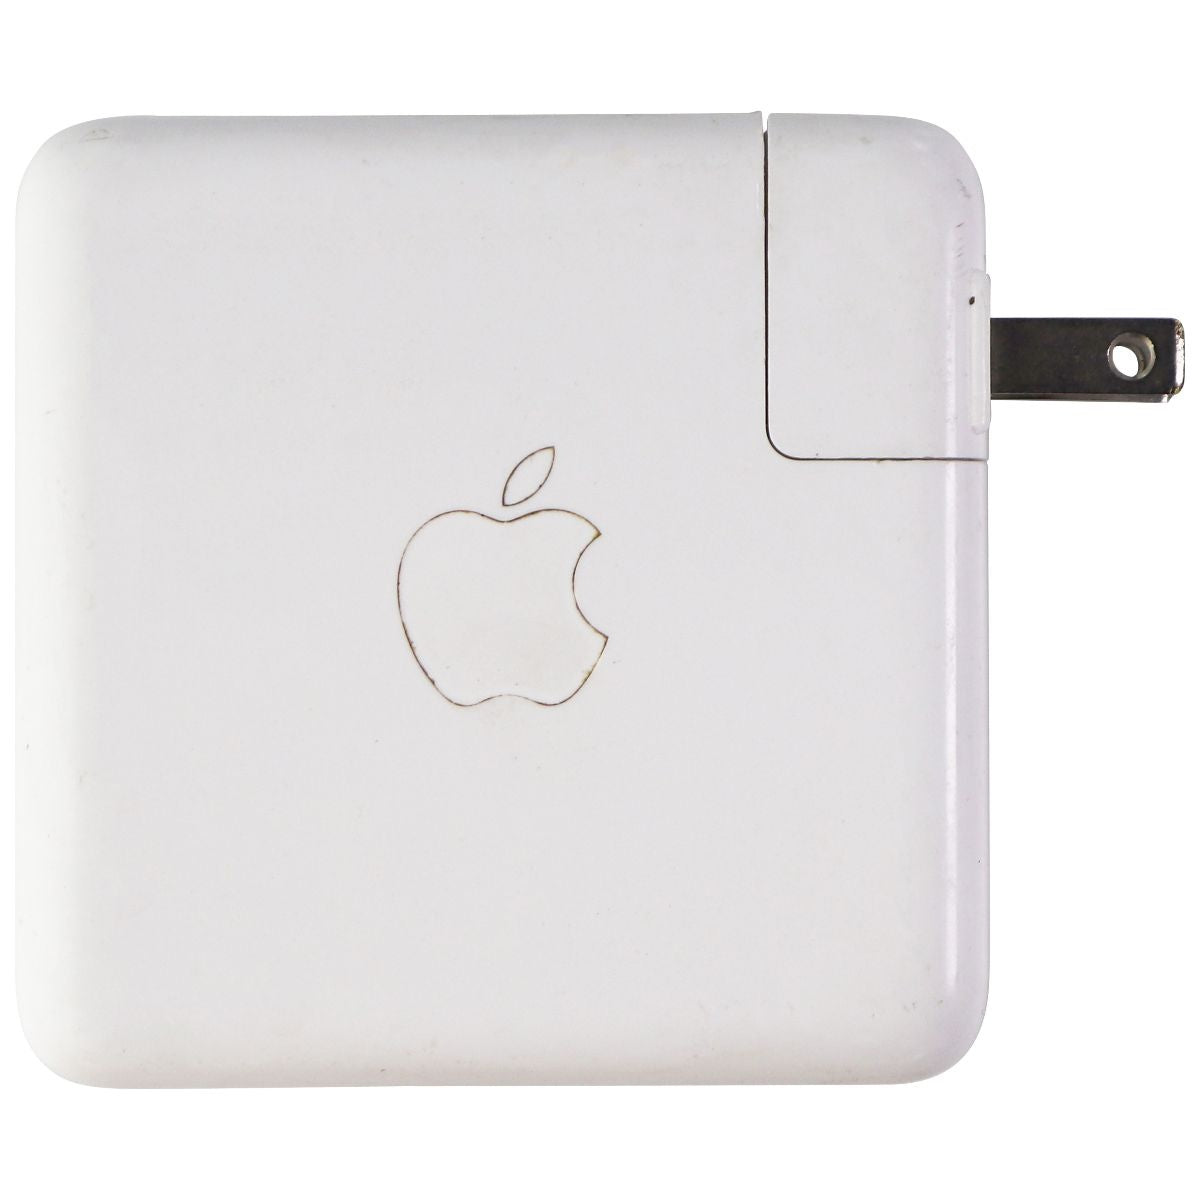 Apple 87W USB-C Power Adapter Wall Charger - White (MNF82LL/A / A1719) Computer Accessories - Laptop Power Adapters/Chargers Apple    - Simple Cell Bulk Wholesale Pricing - USA Seller